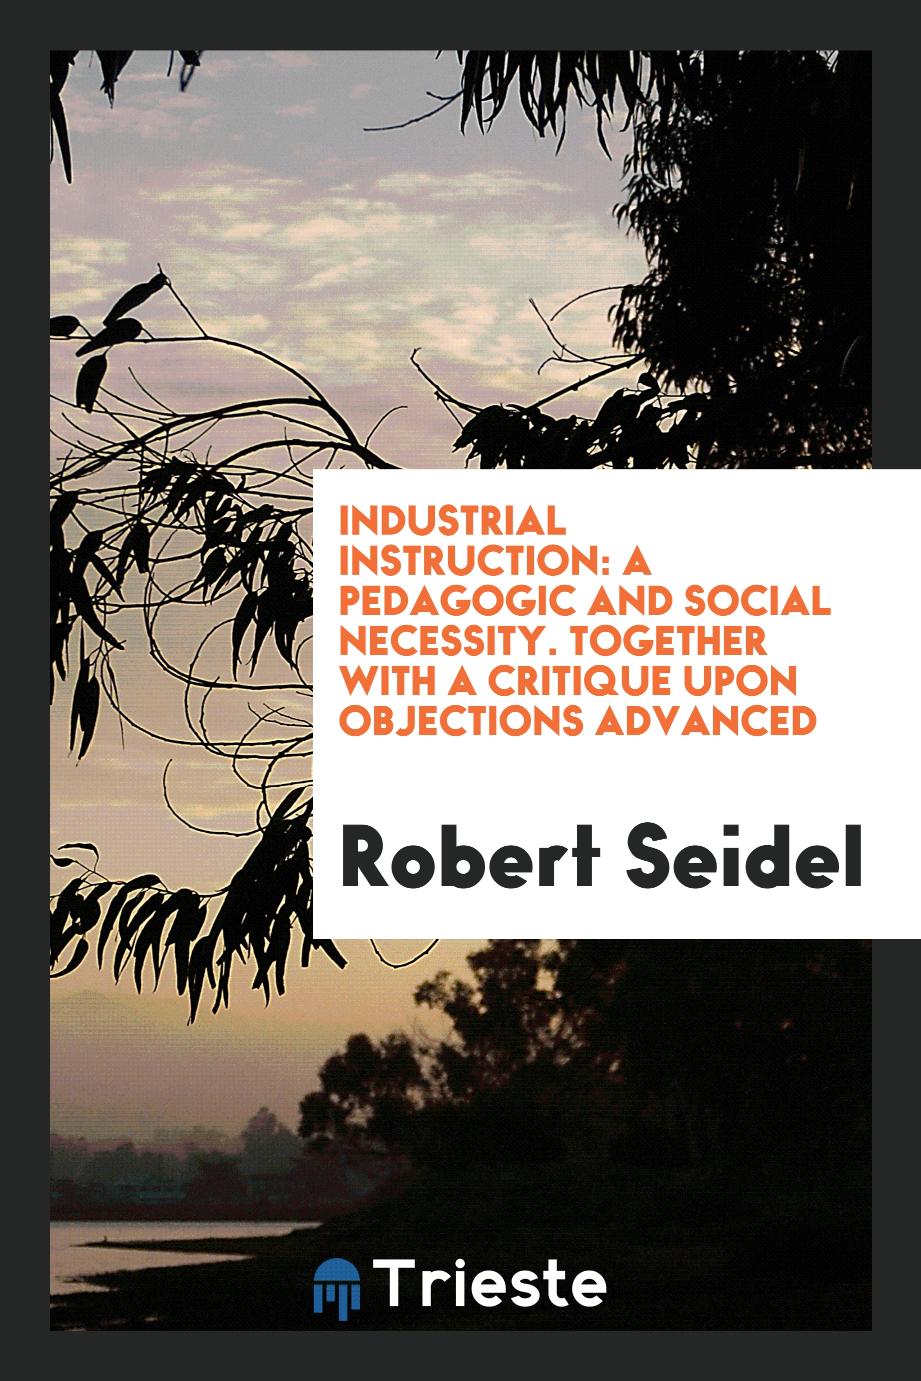 Industrial Instruction: A Pedagogic and Social Necessity. Together with a Critique upon Objections Advanced